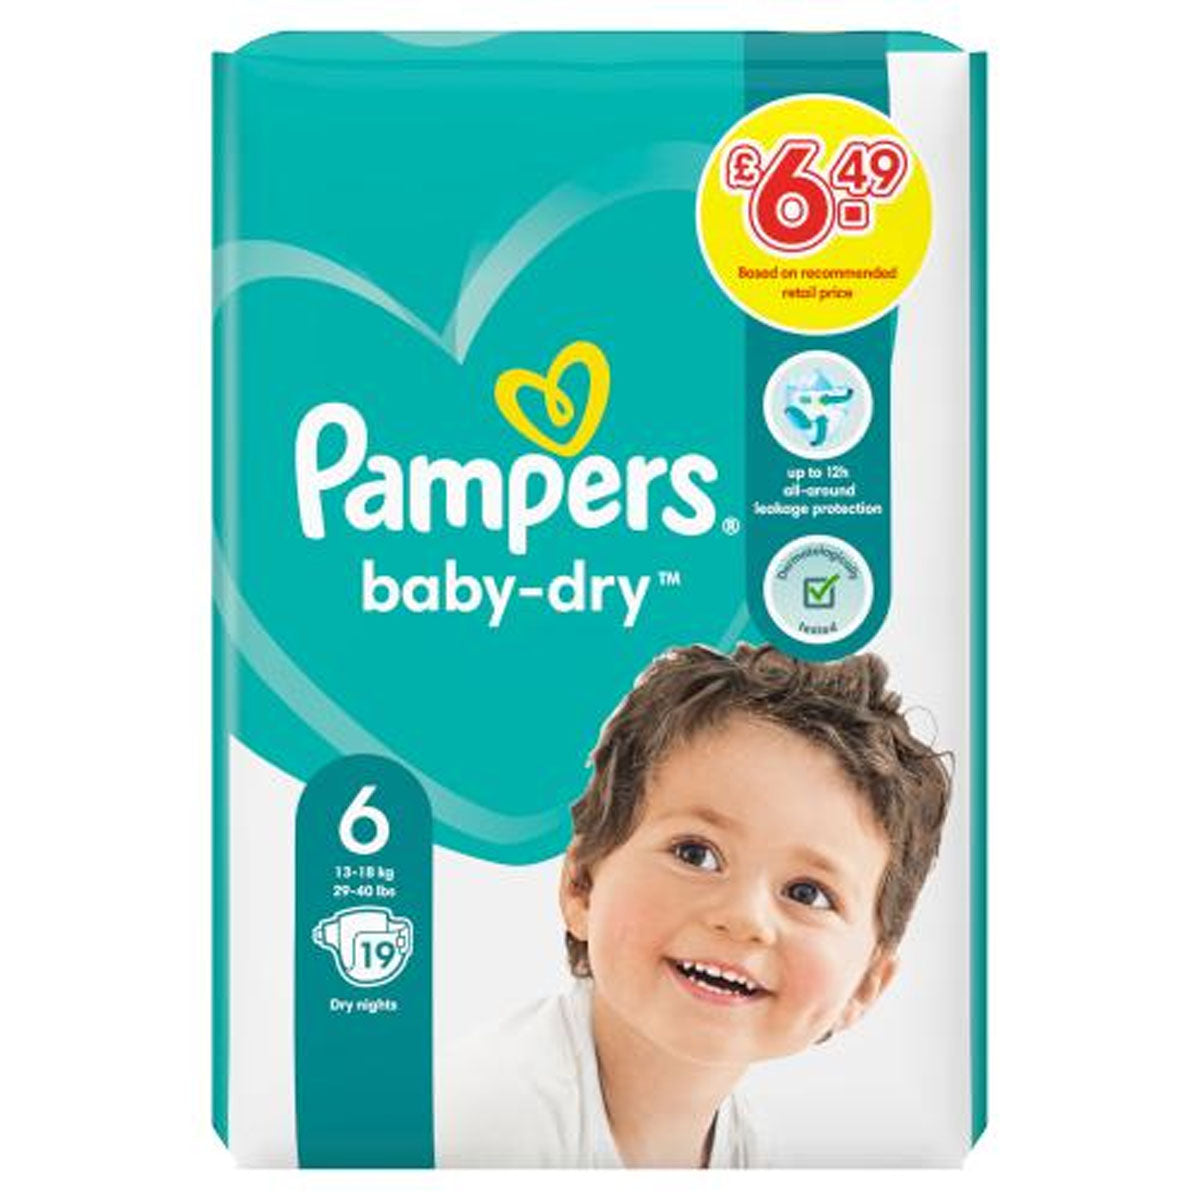 Pampers - Baby-Dry Size 6, Nappies, - 13kg - 18kg - Continental Food Store